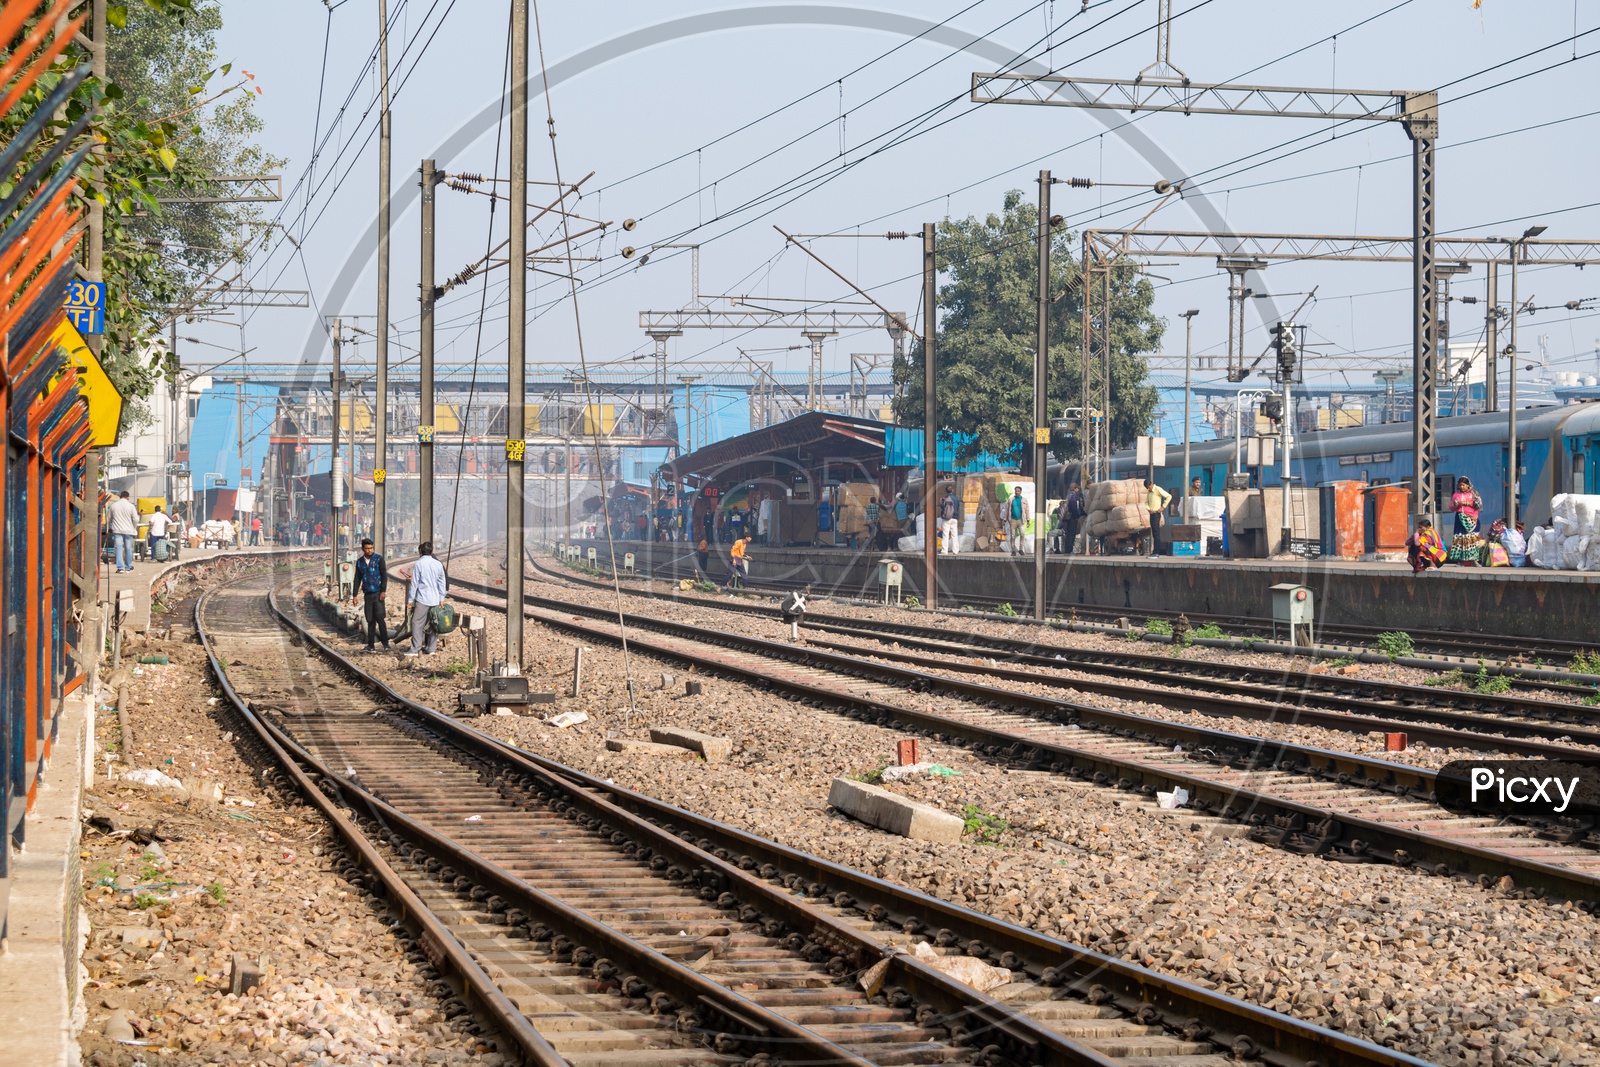 Indian Railway track and parcels and luggage on the platform